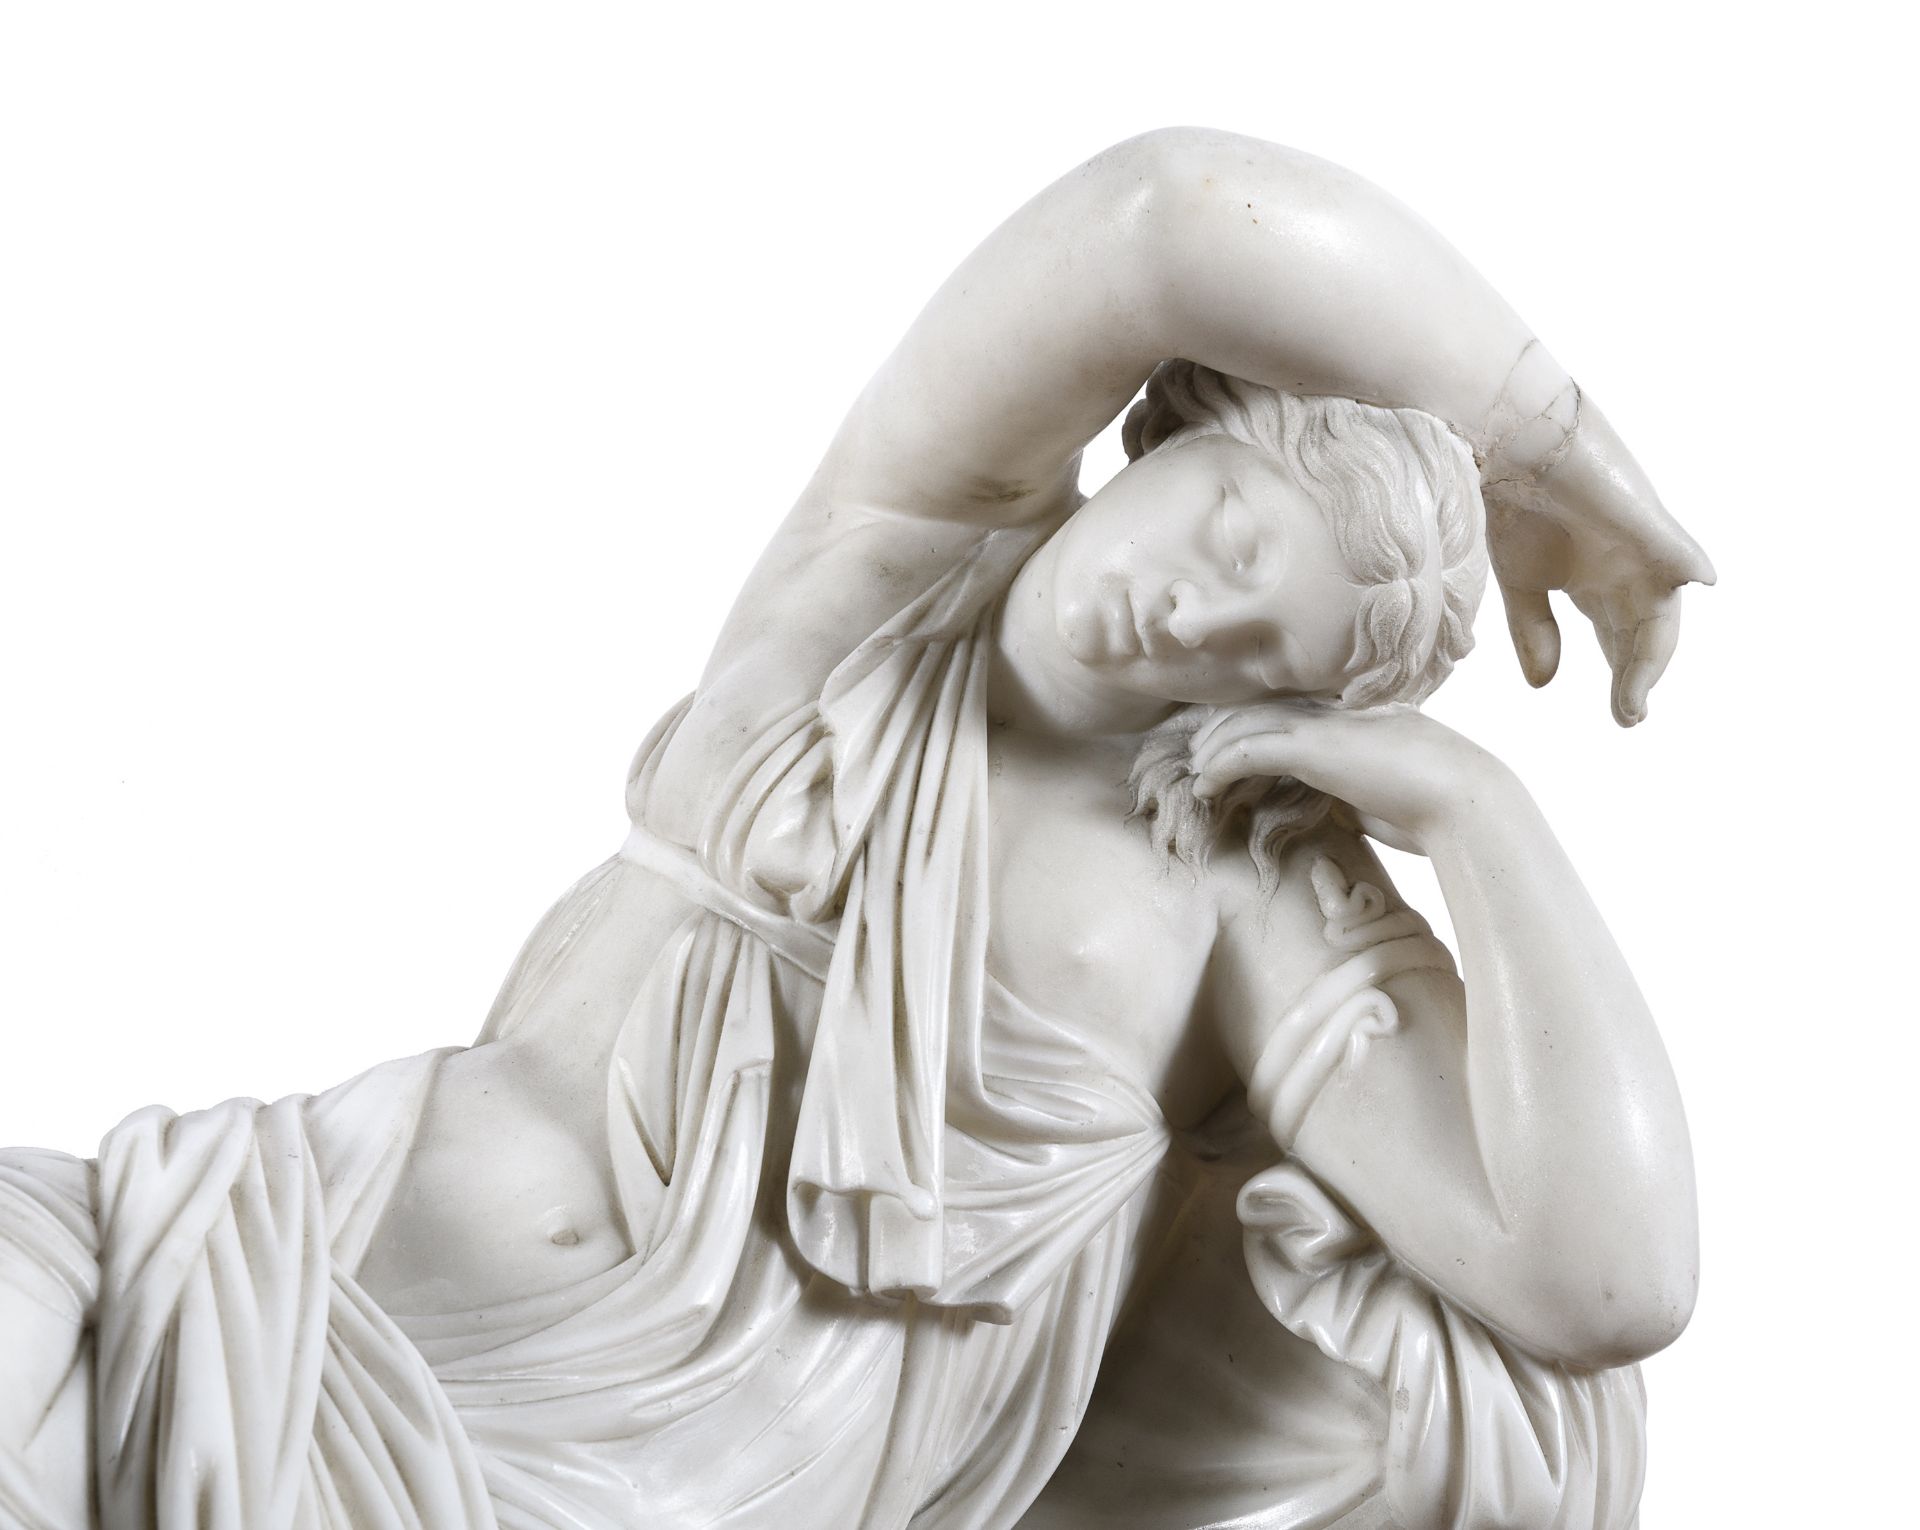 ITALIAN NEOCLASSICAL MARBLE SCULPTURE EARLY 19TH CENTURY - Image 3 of 3